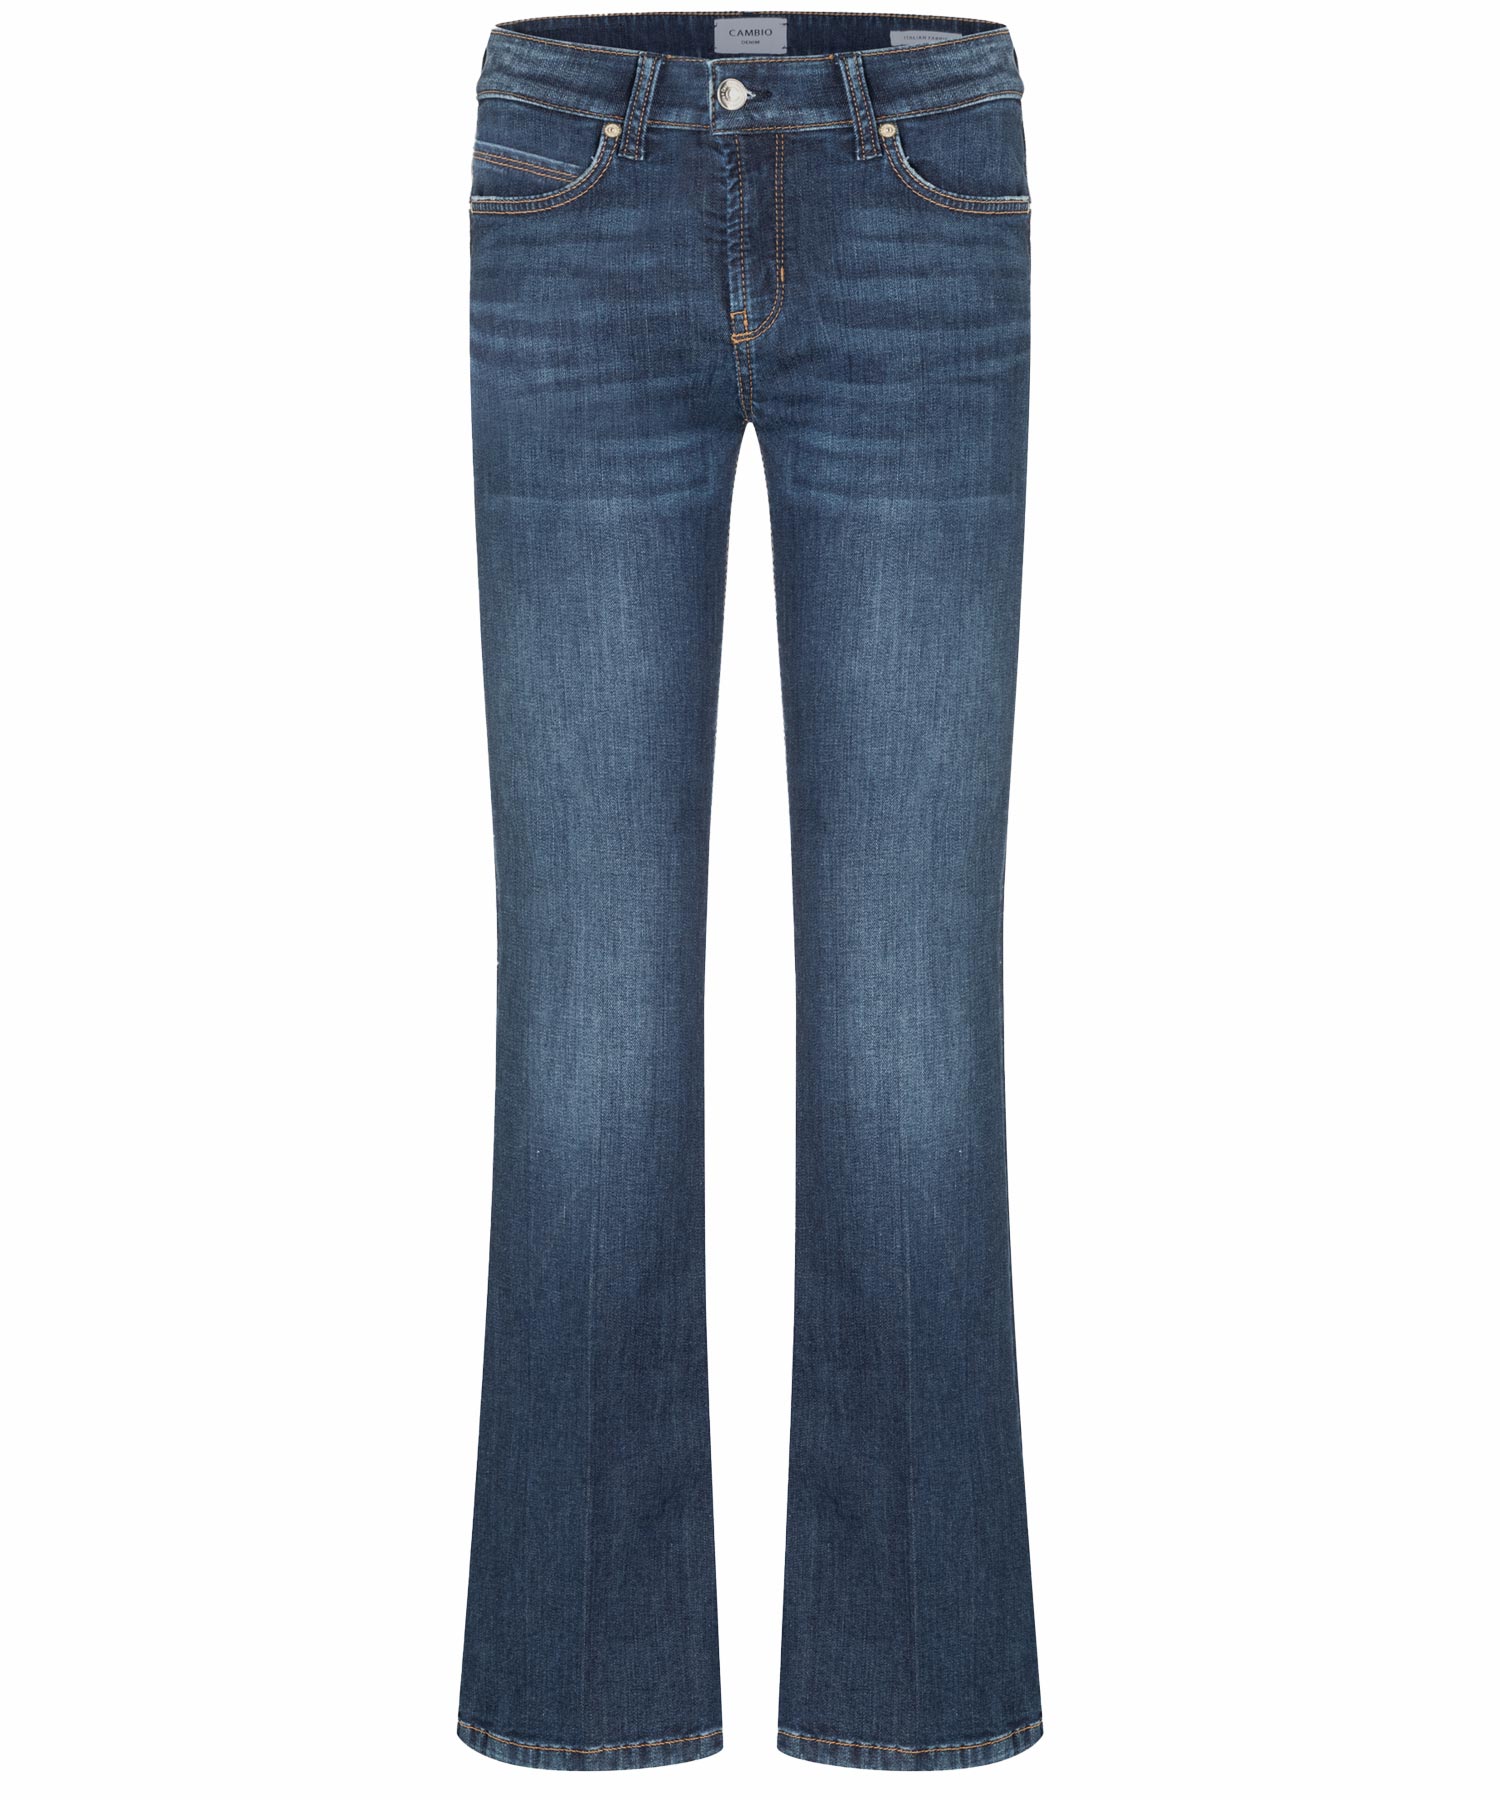 Cambio Jeans Paris flared in blue